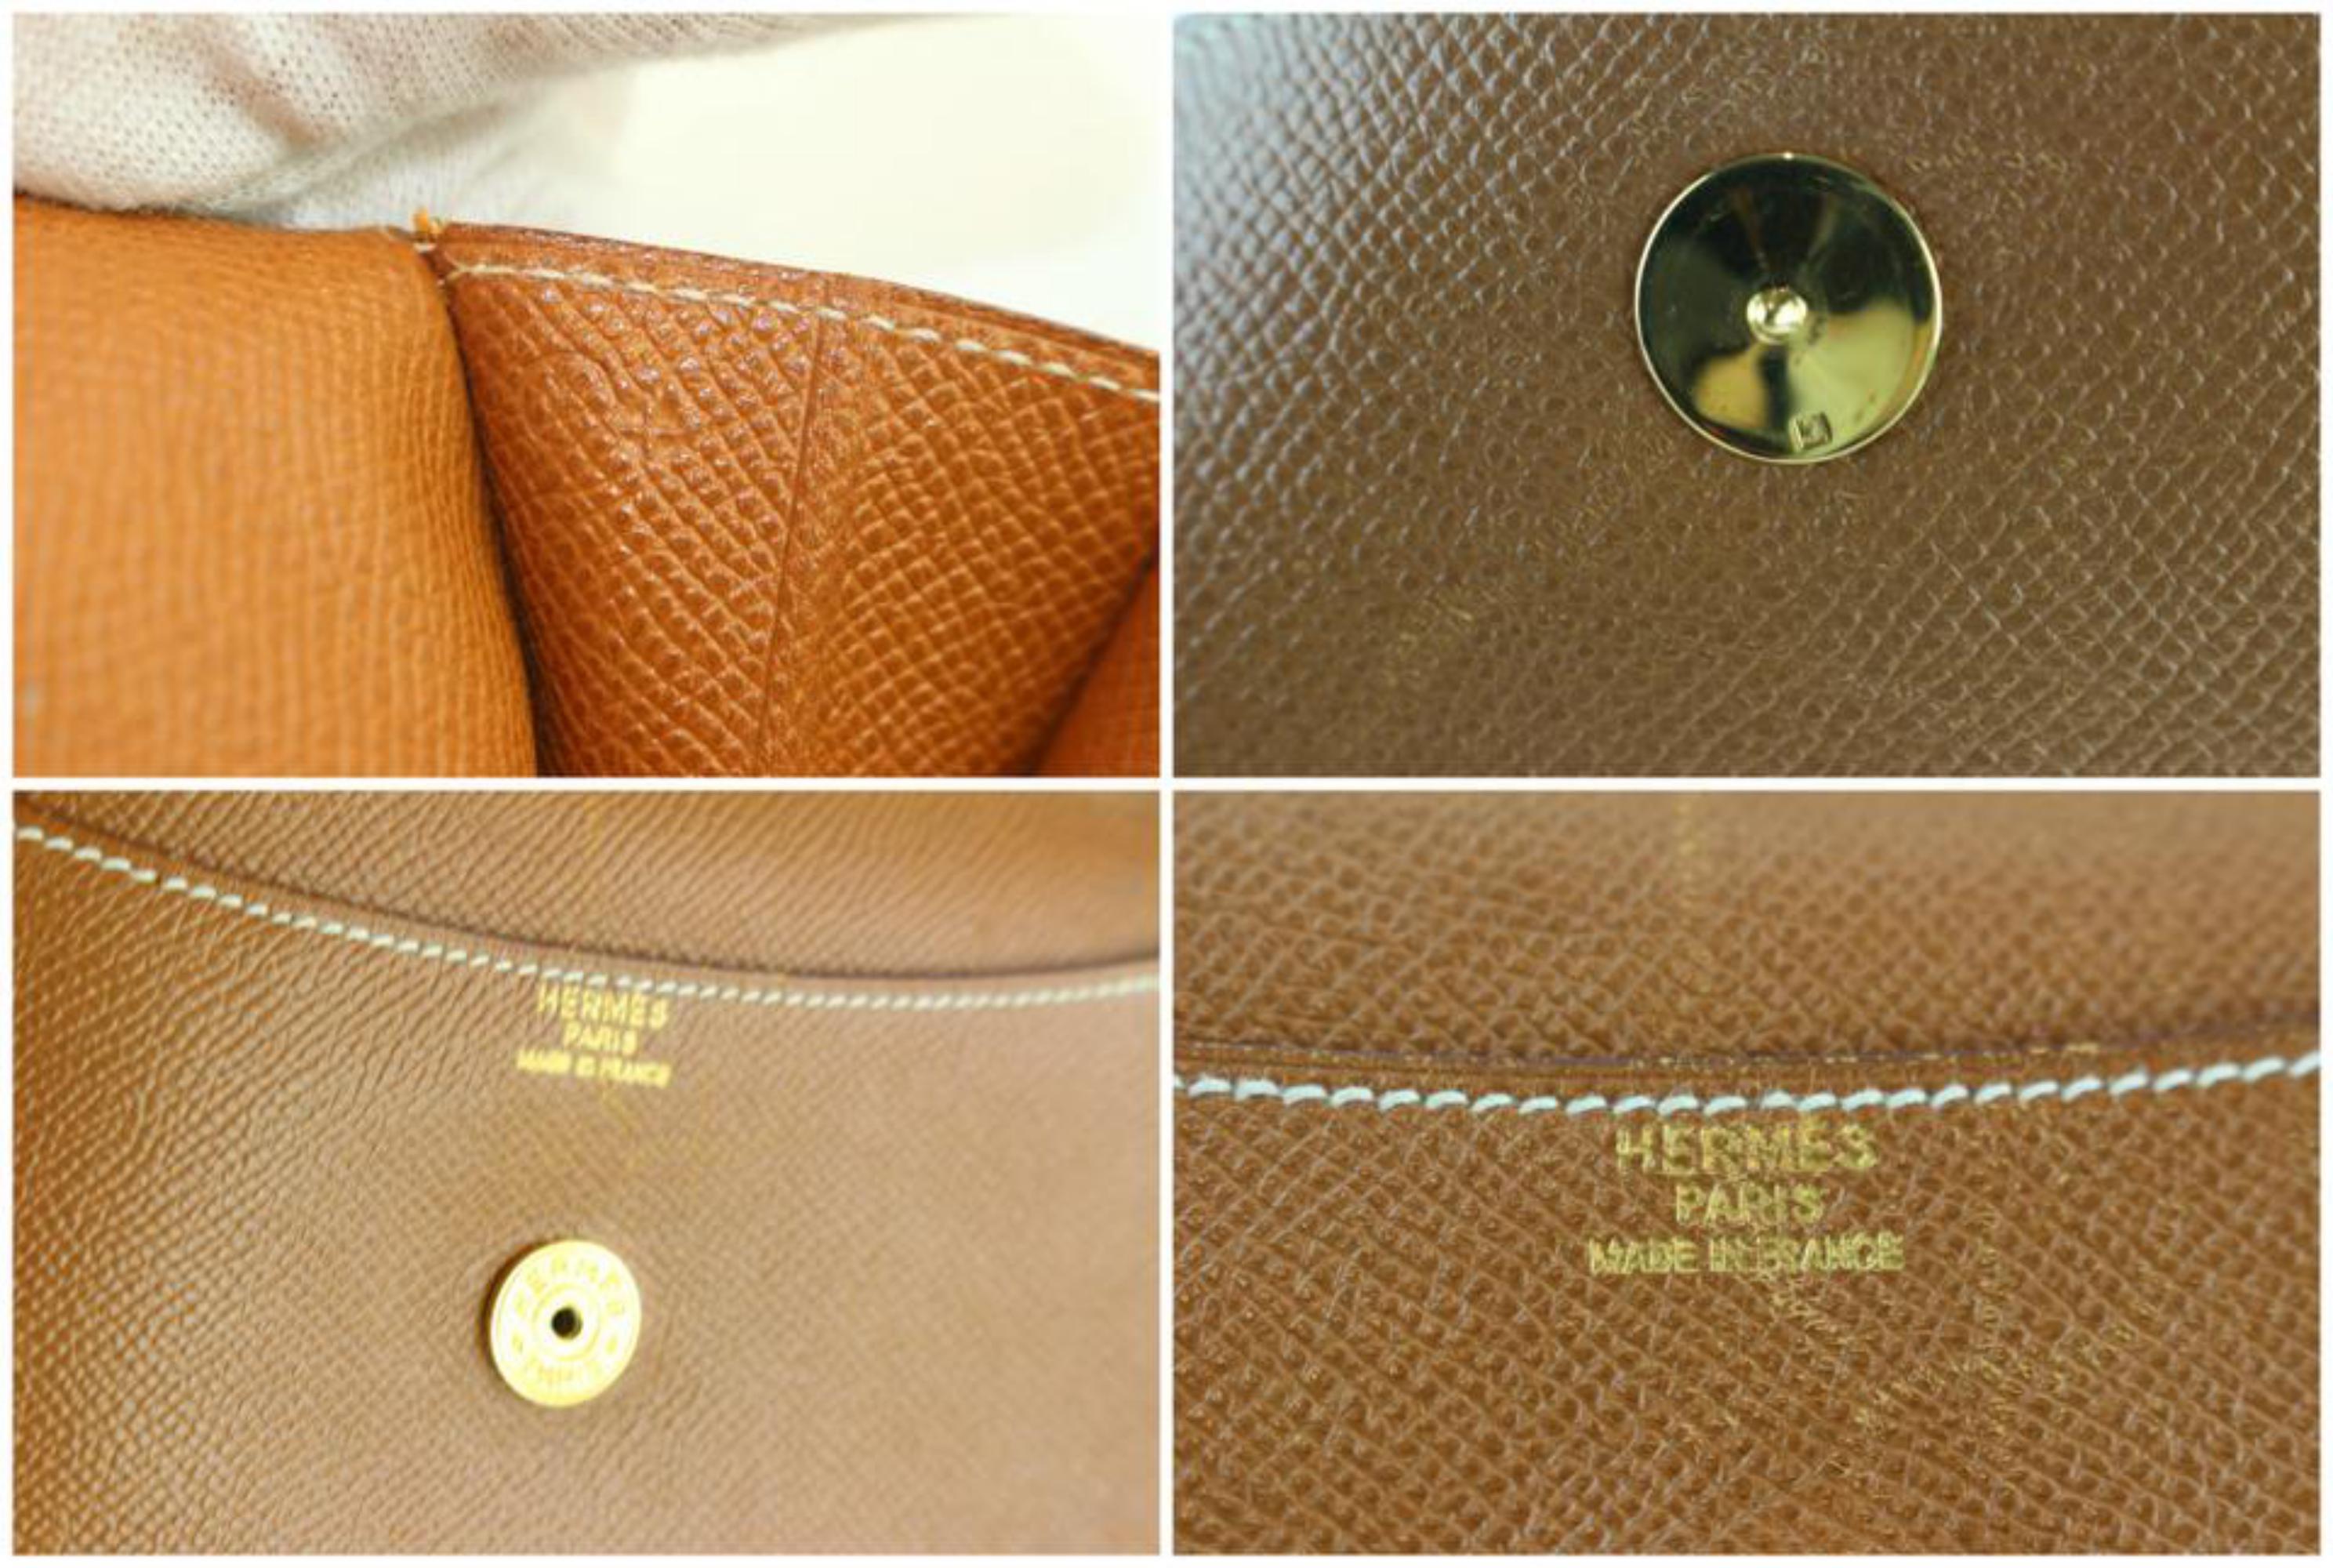 Hermès Pochette Rio Envelope 7hz1128 Brown Leather Clutch In Good Condition For Sale In Forest Hills, NY